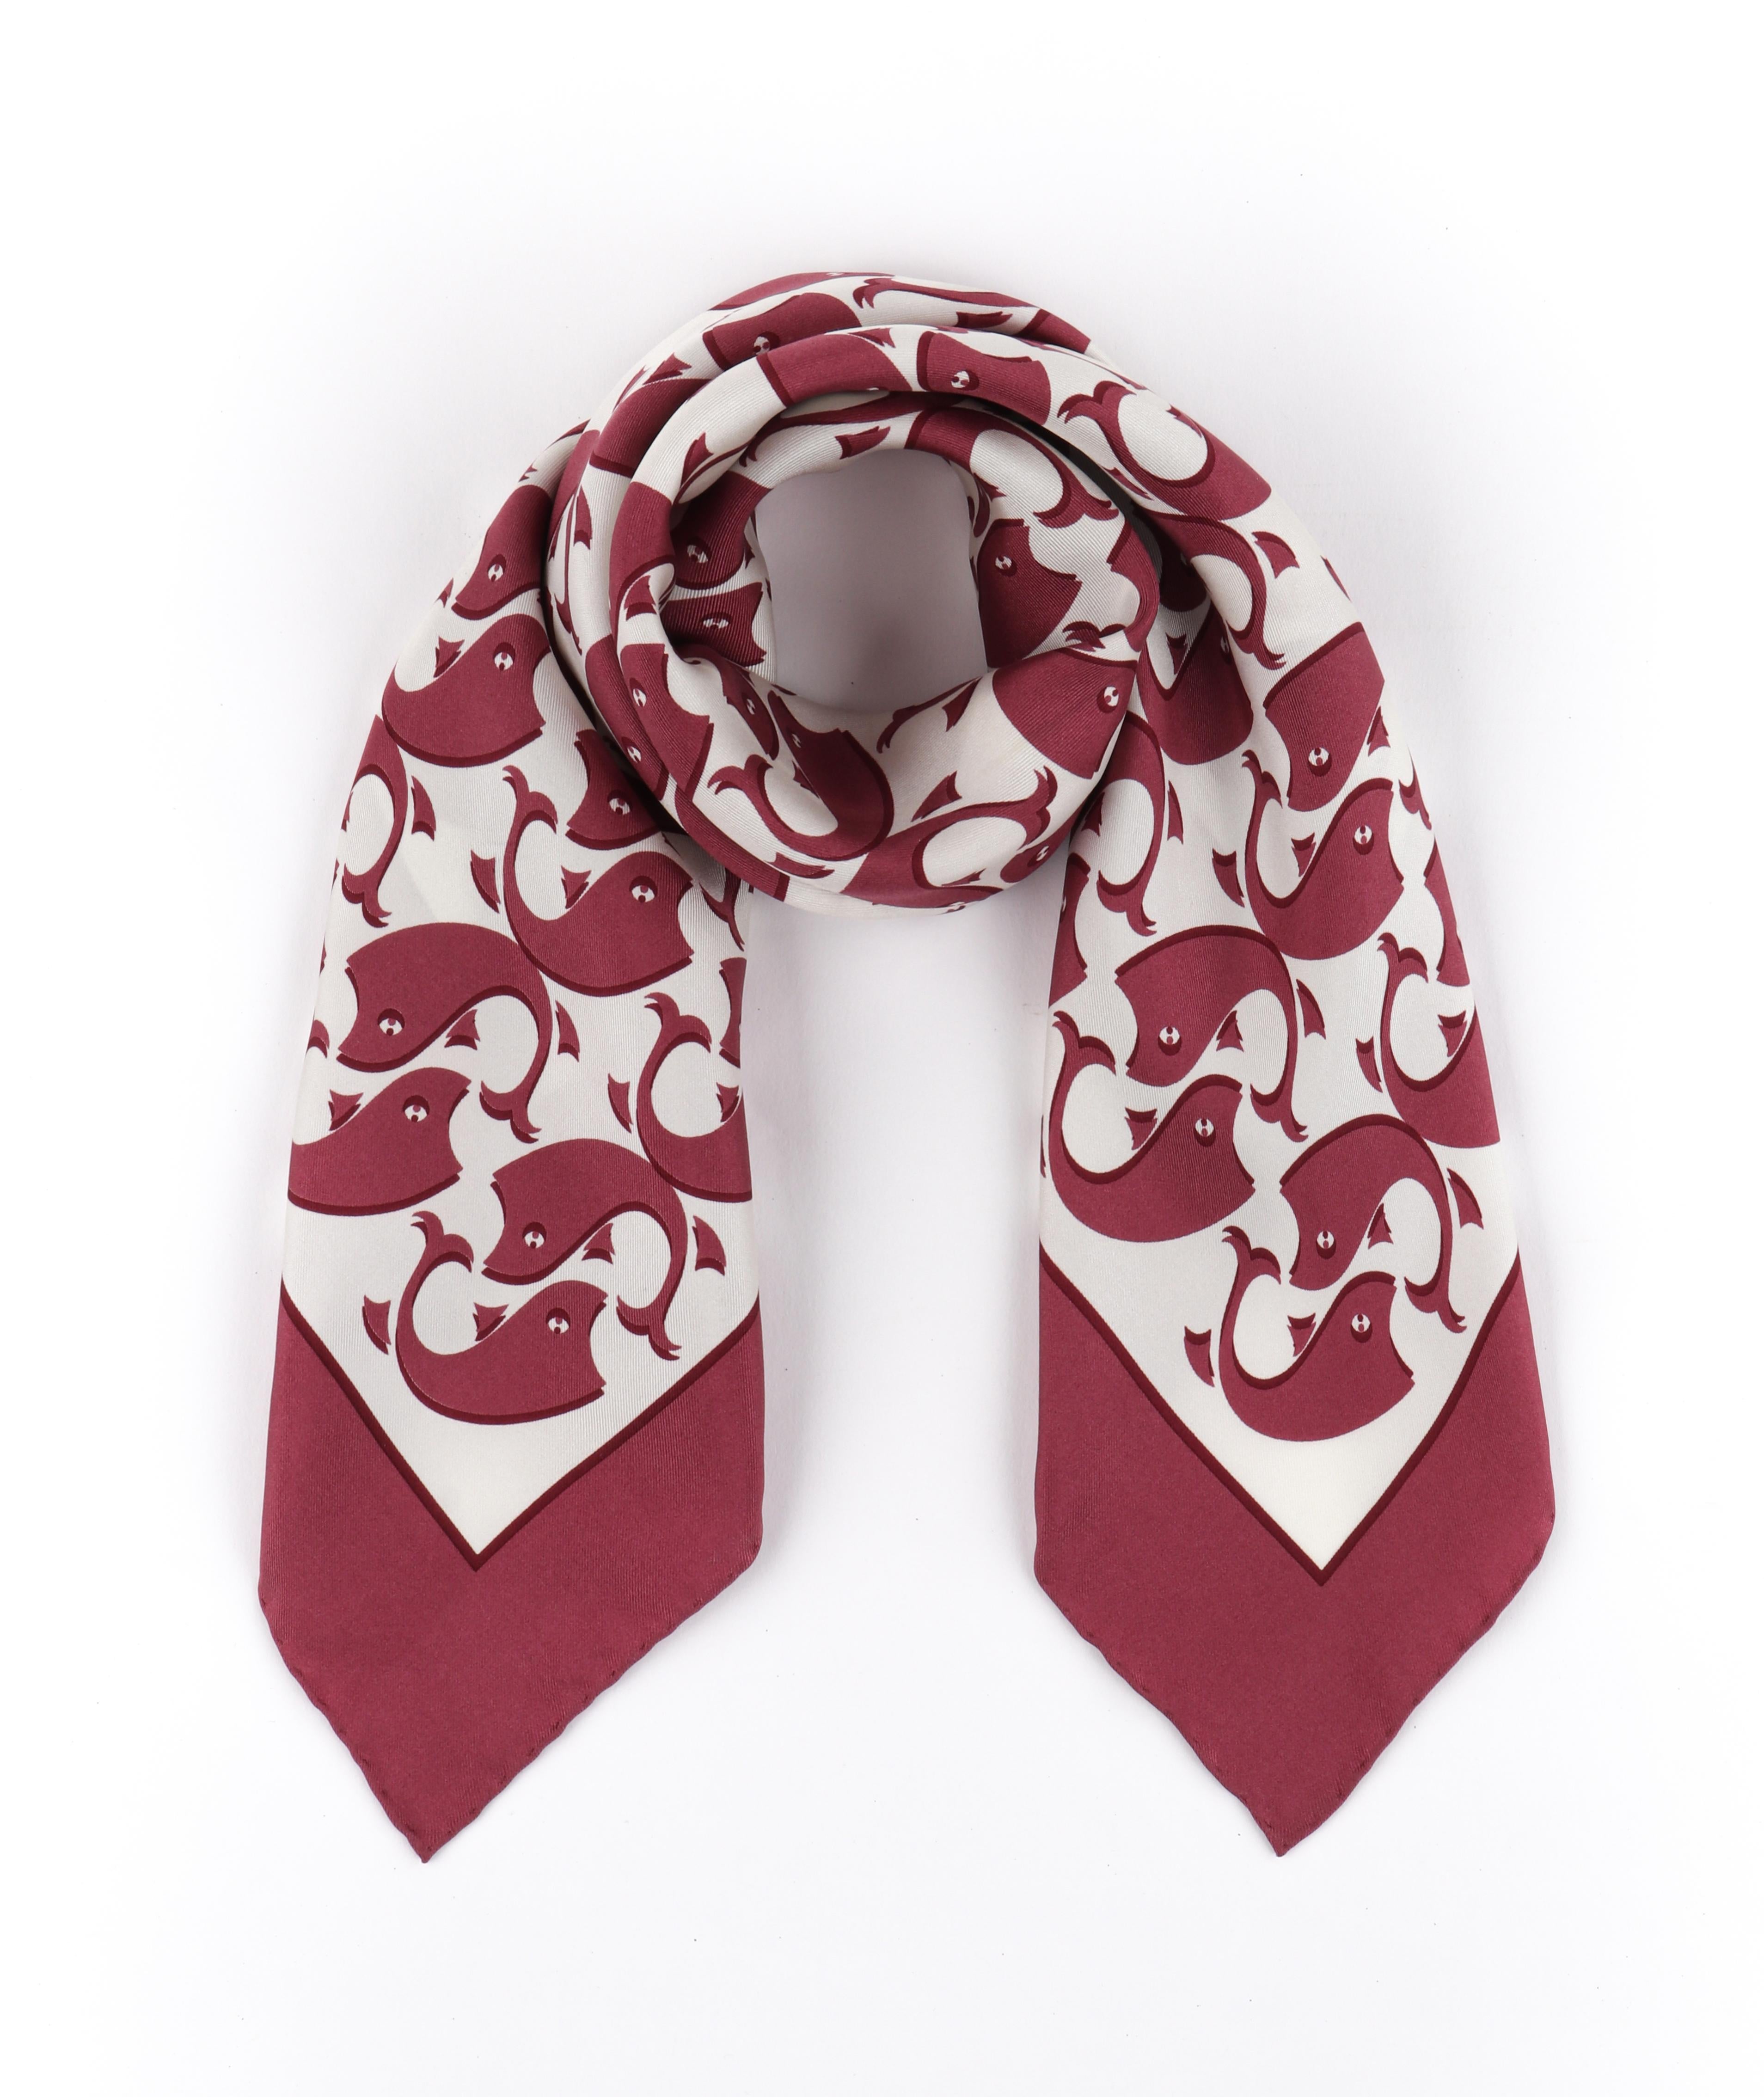 GUCCI Burgundy White Interlocking Whale Pattern GG Logo Square Silk Scarf
 
Brand / Manufacturer: Gucci 
Style: Square Scarf 
Color(s): Shades of Burgundy and White 
Lined: No 
Unmarked Fabric Content (feel of): 100% Silk Twill 
Additional Details /